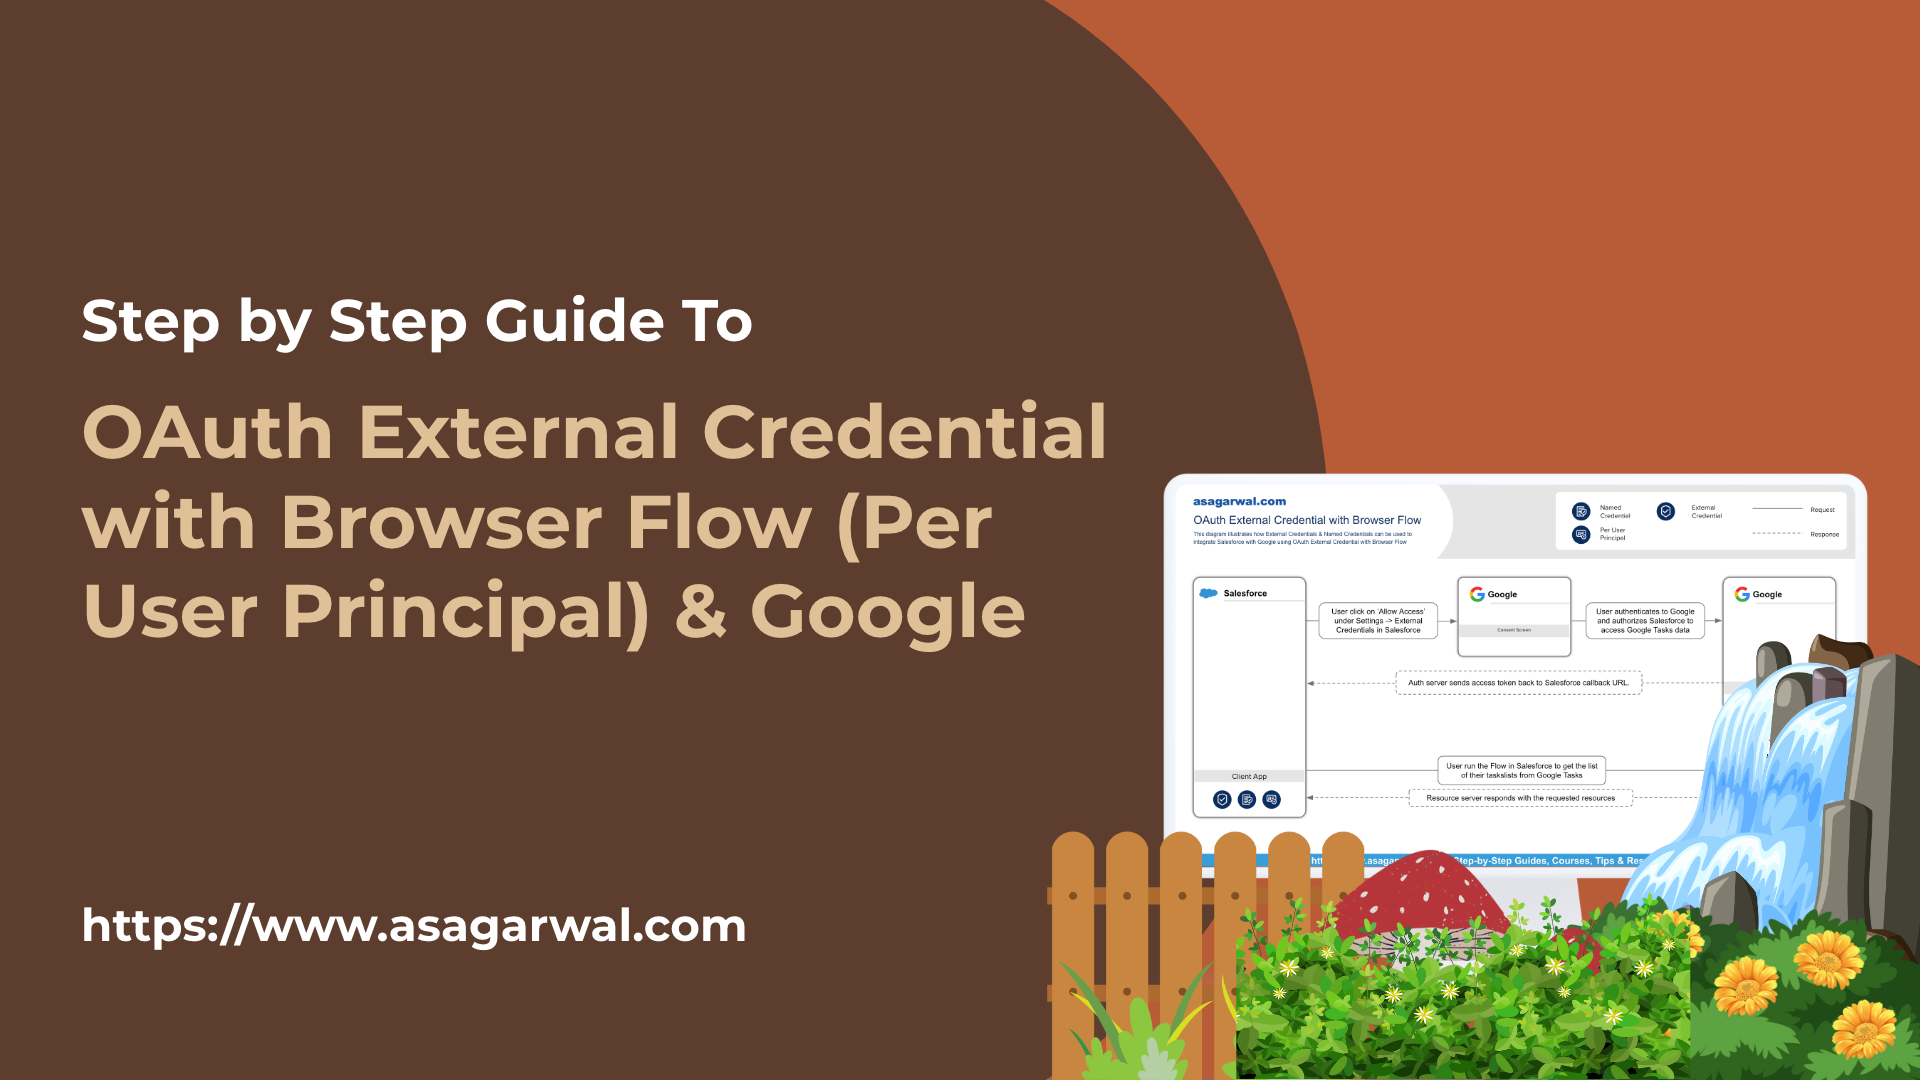 Step by Step Guide to OAuth External Credential with Browser Flow (Per User Principal) & Google